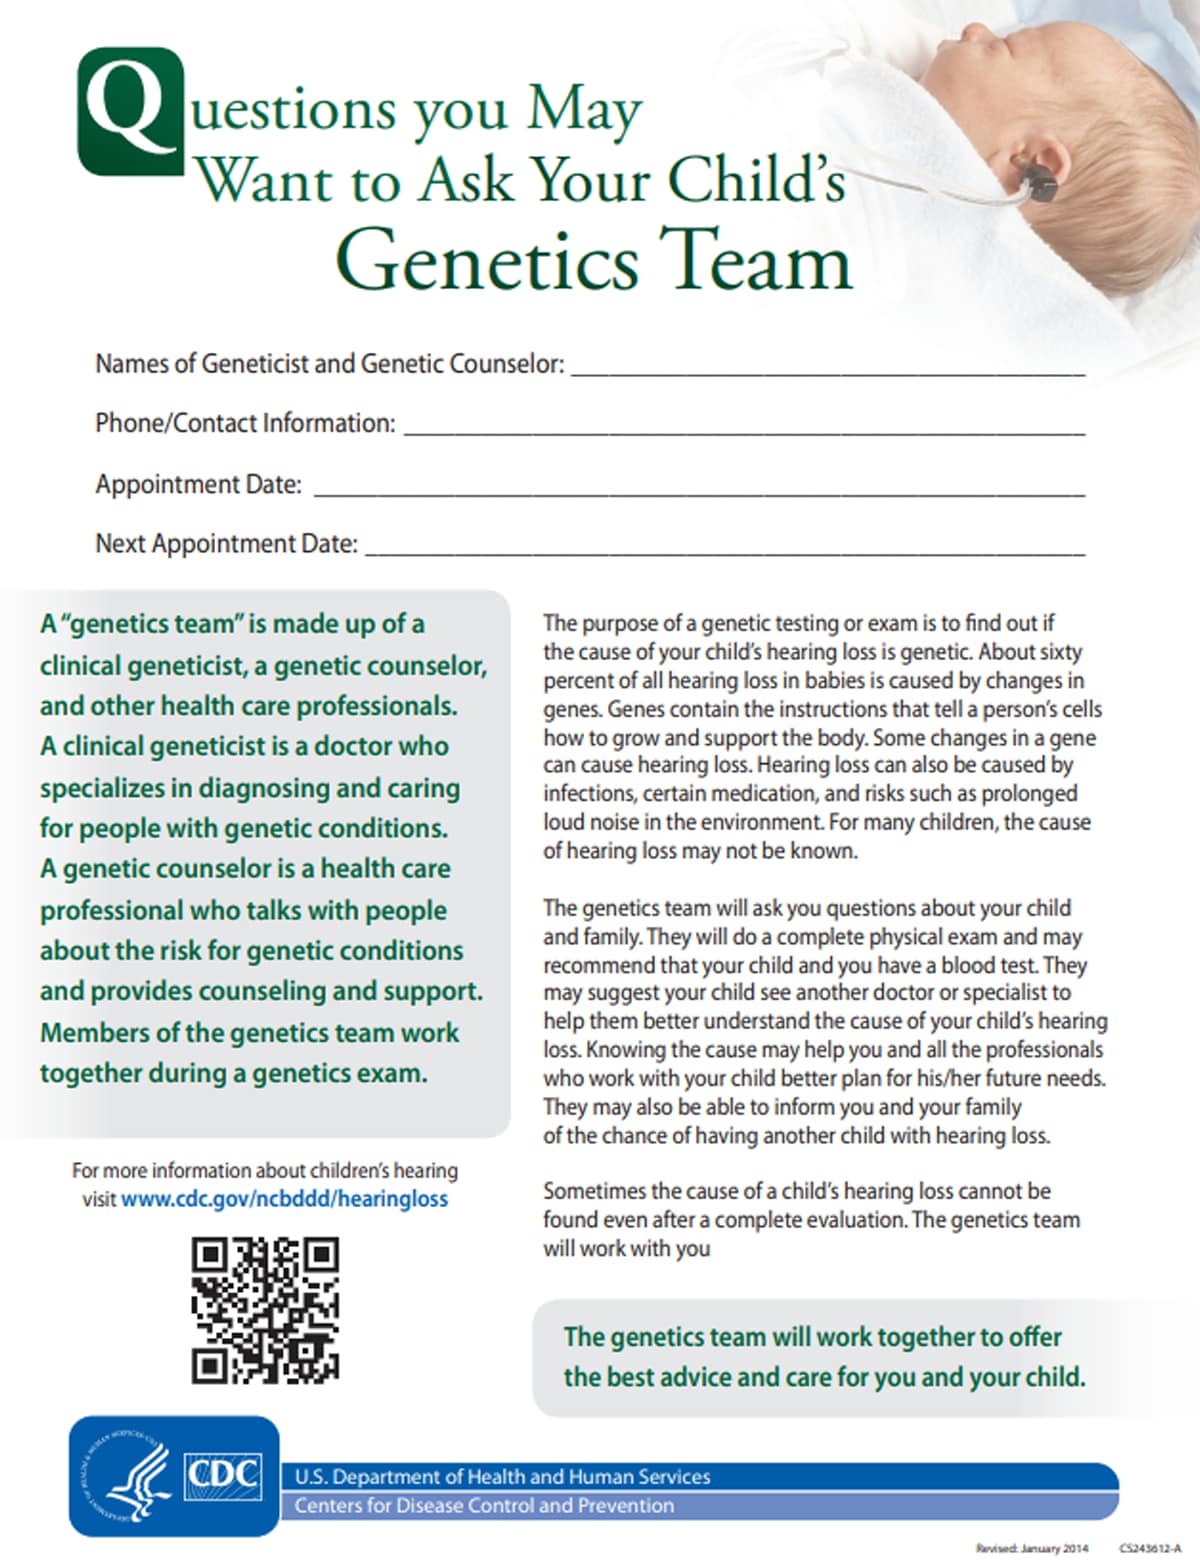 PDF Preview Question you may want to ask your child's genetics team